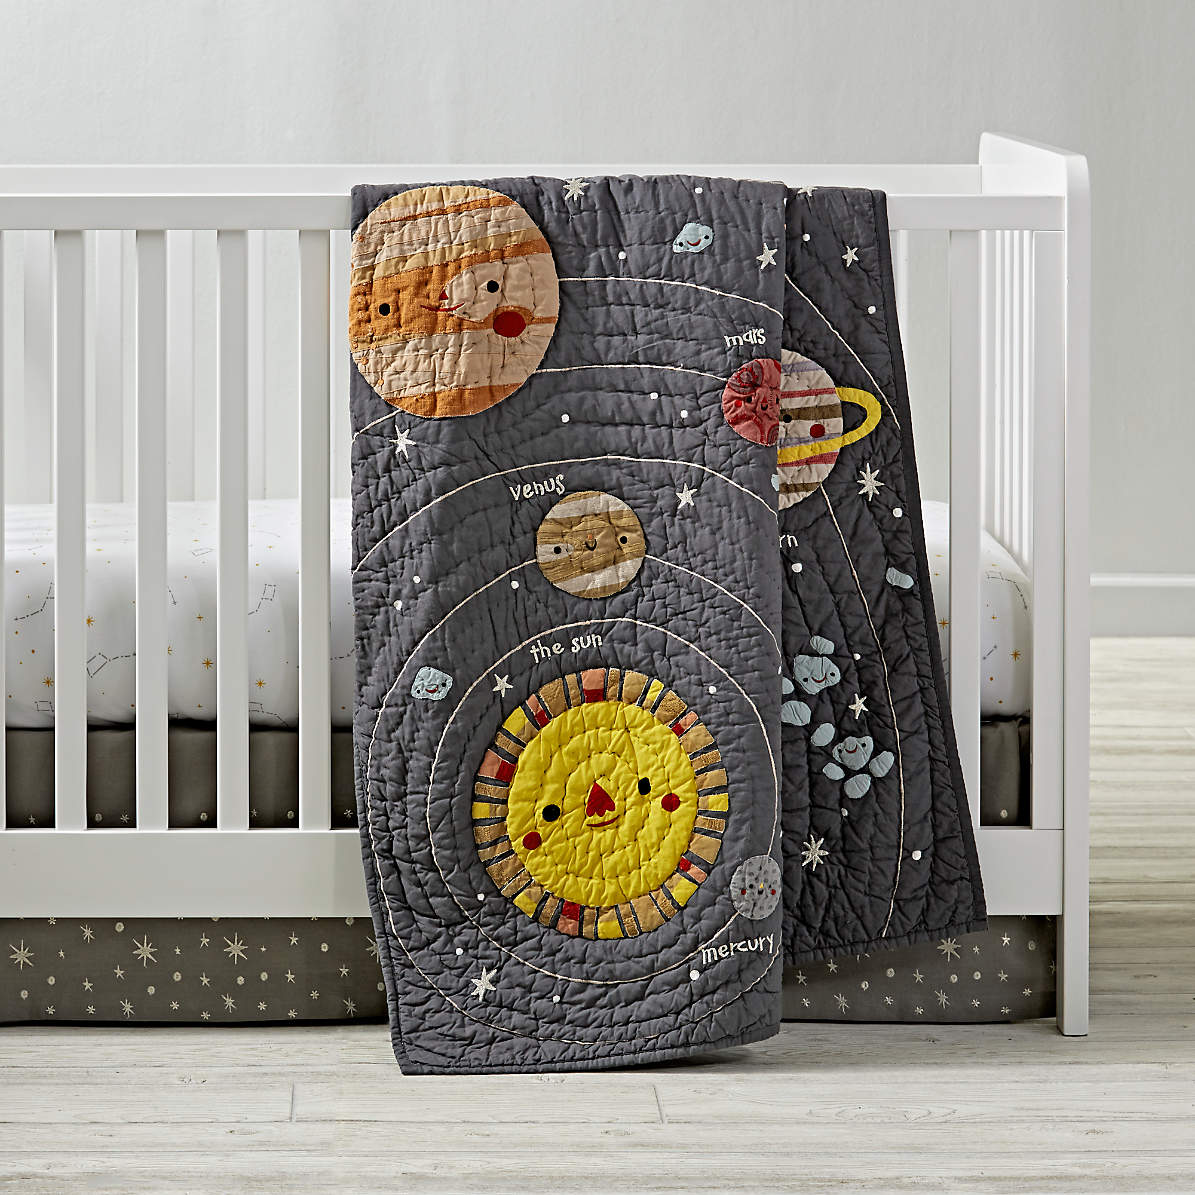 outer space crib sheets